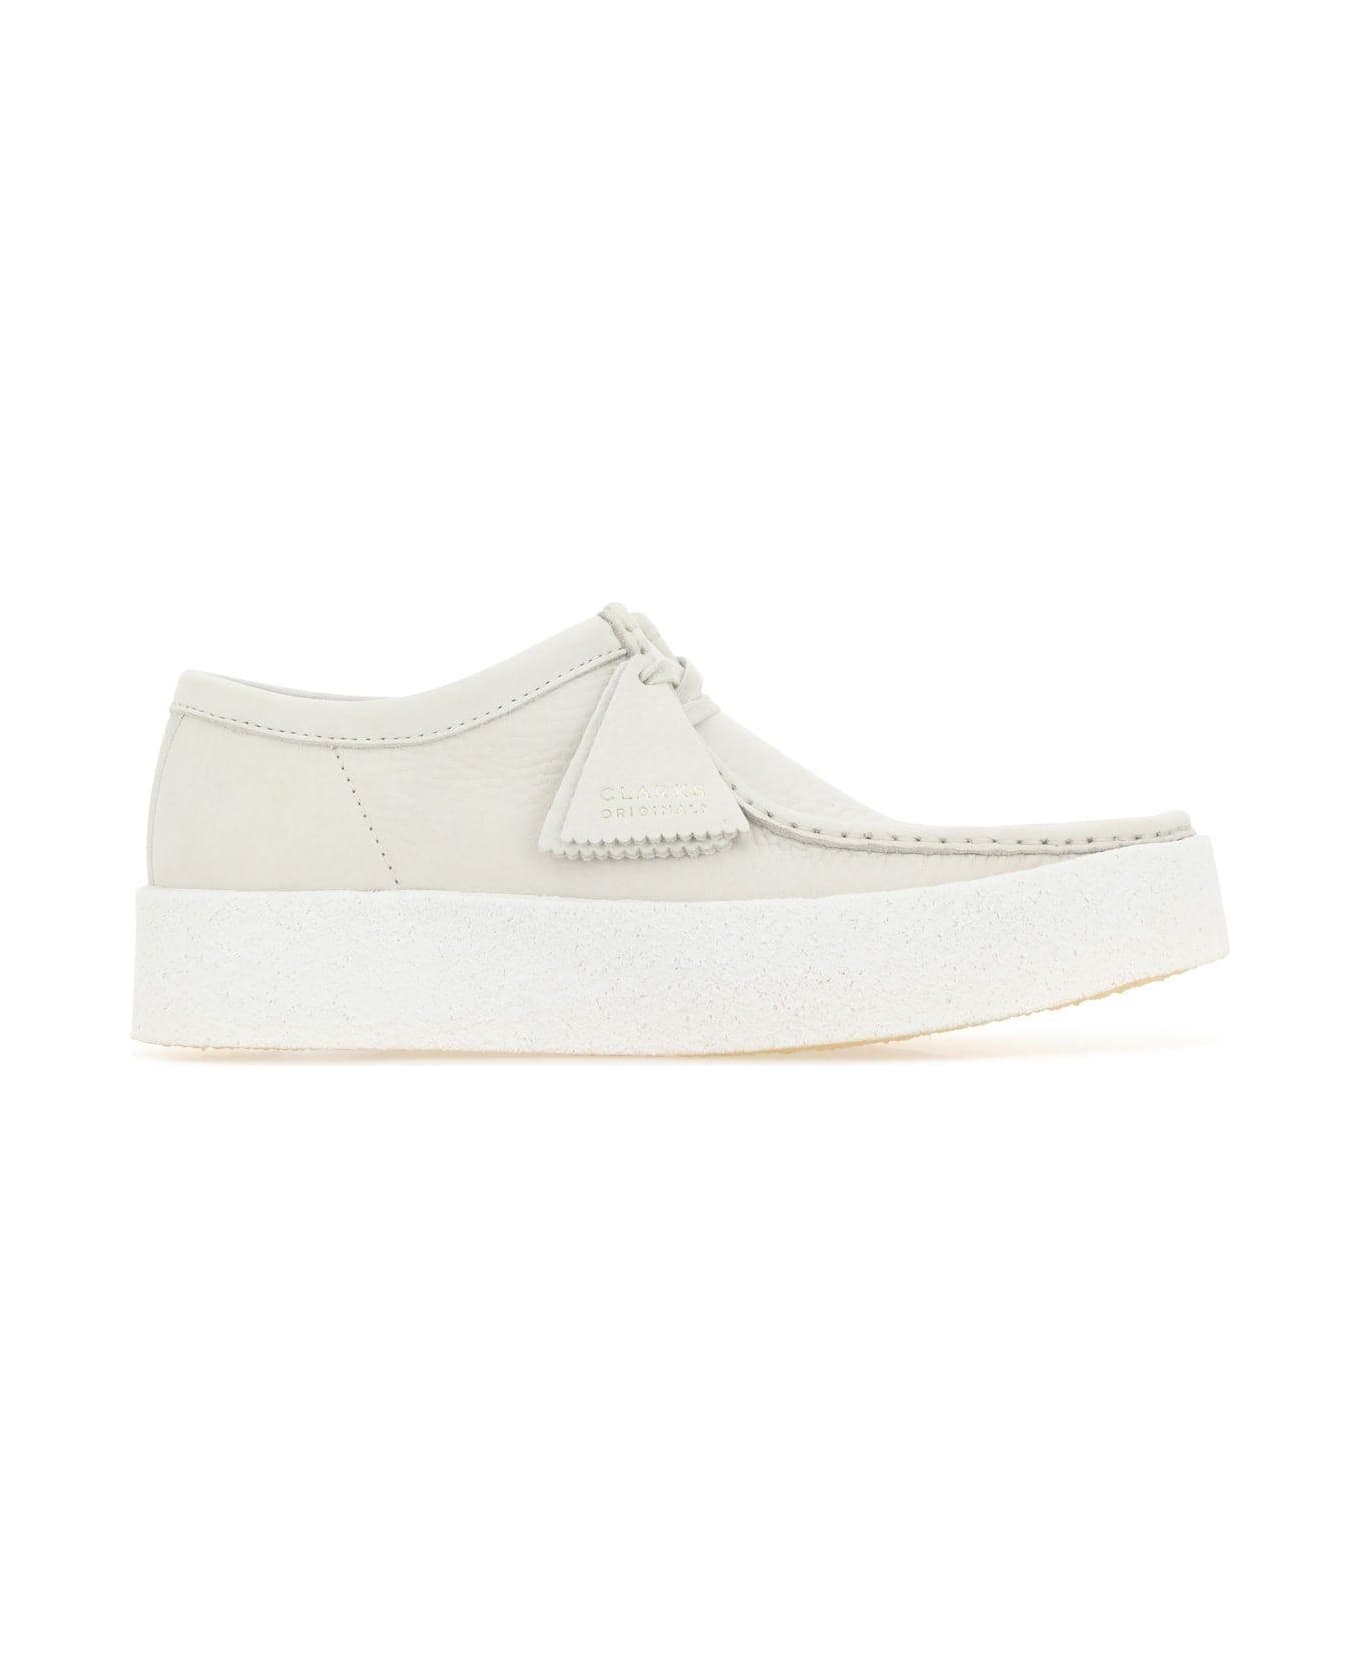 Clarks Sand Nubuck Wallabee Ankle Boots - White Nubuck